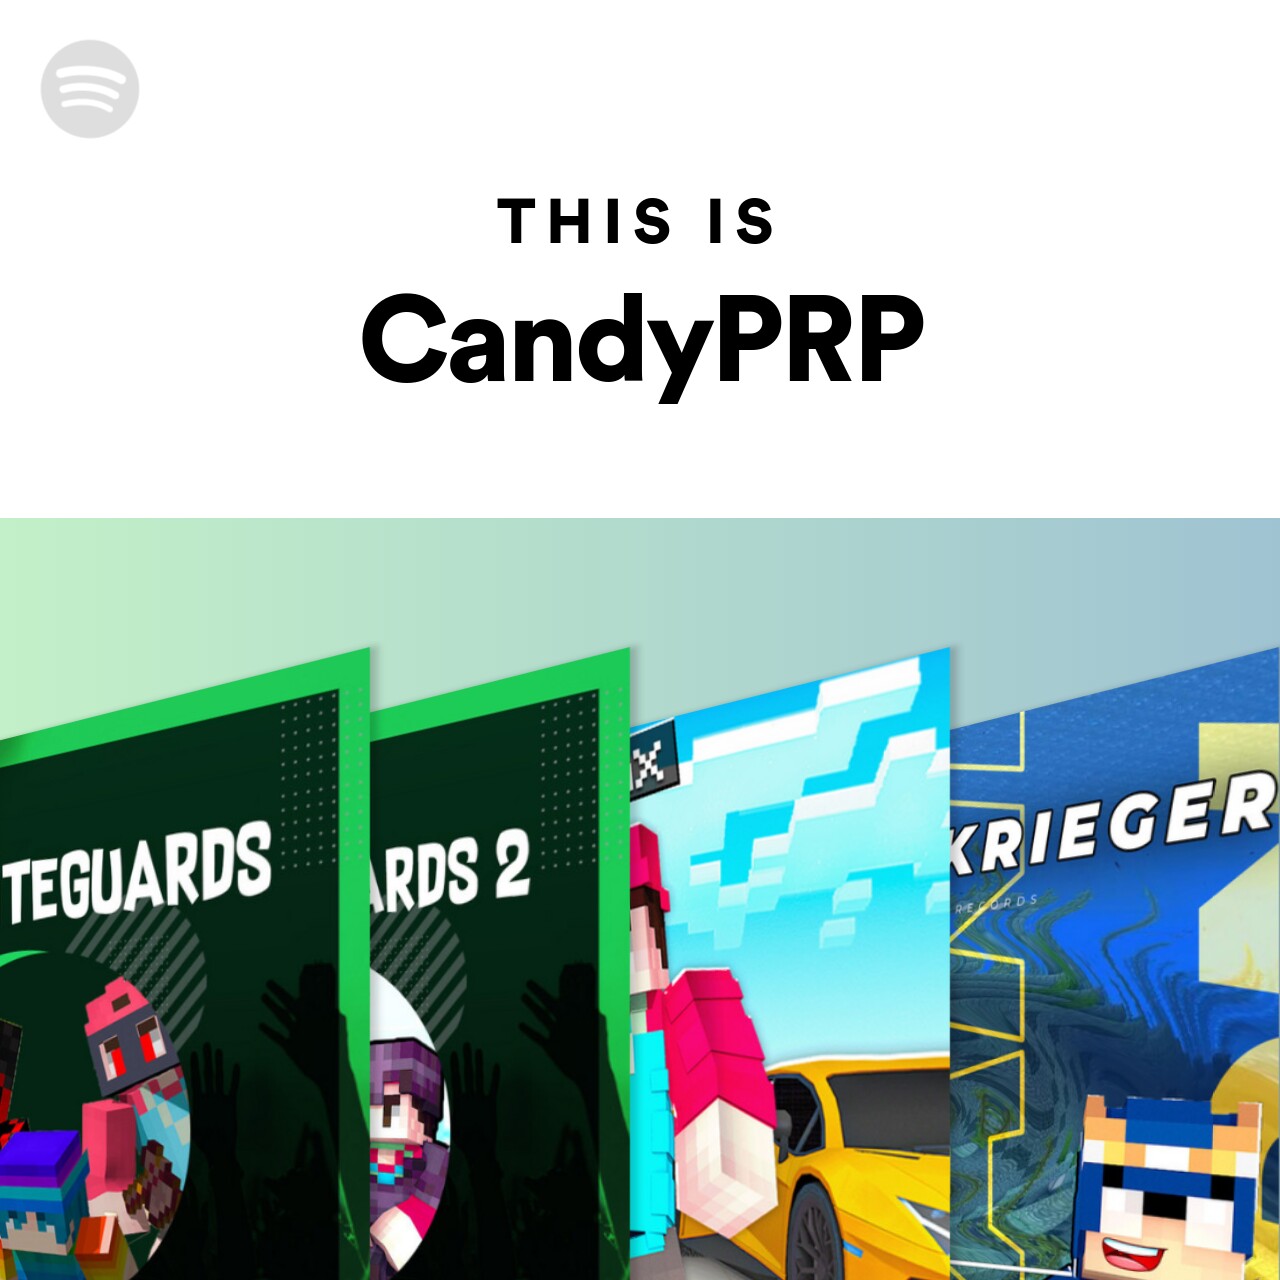 This Is CandyPRP